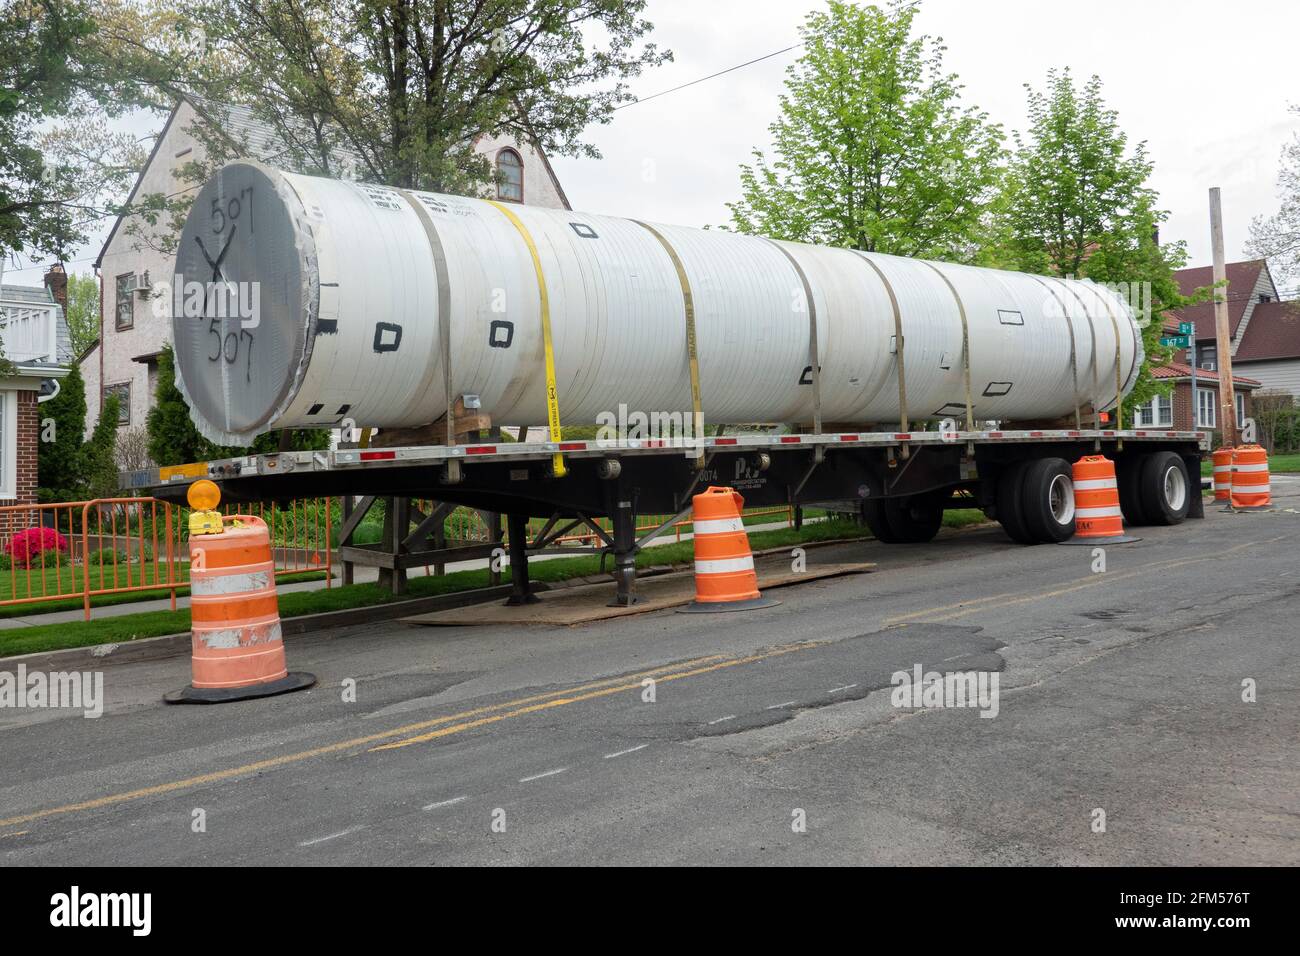 A replacement sewage pipe on a flatbed truck about to be installed in a residential neighborhood in Northwest Queens, New York City. Stock Photo